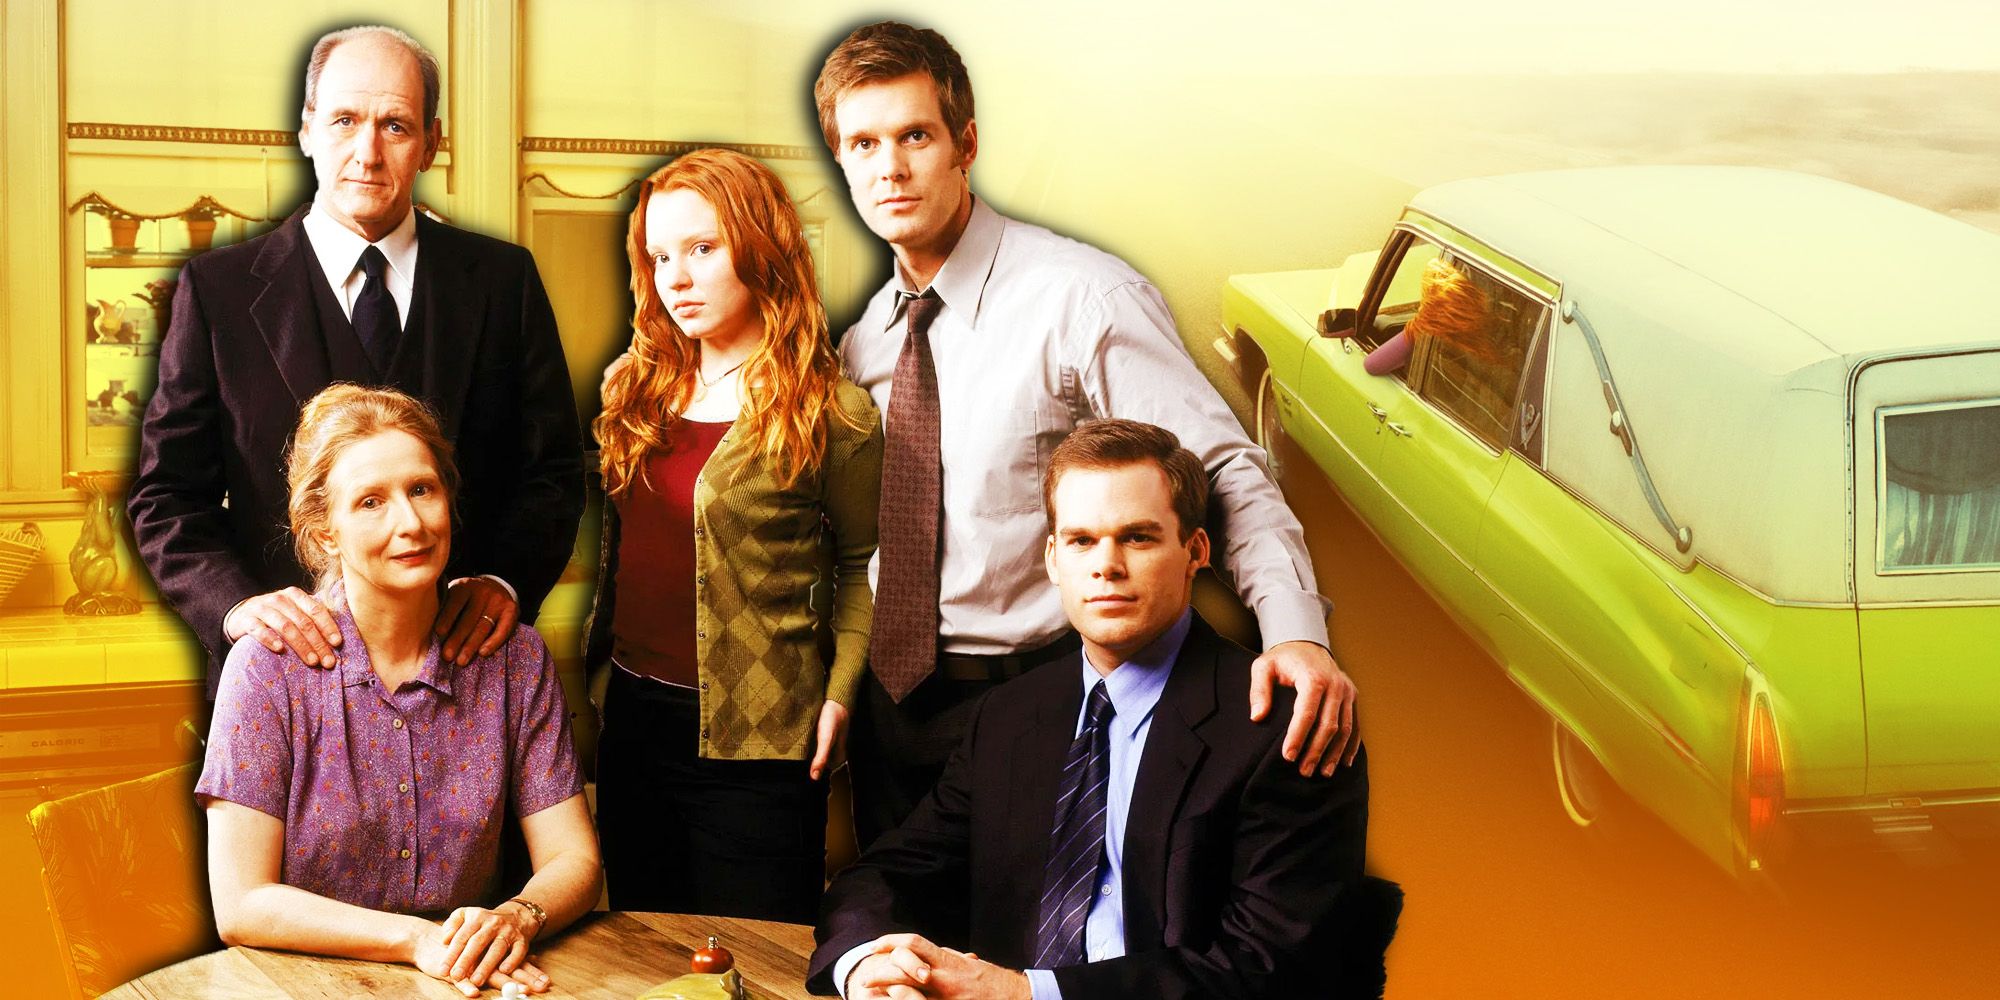 Six Feet Under main characters and the show's signature car